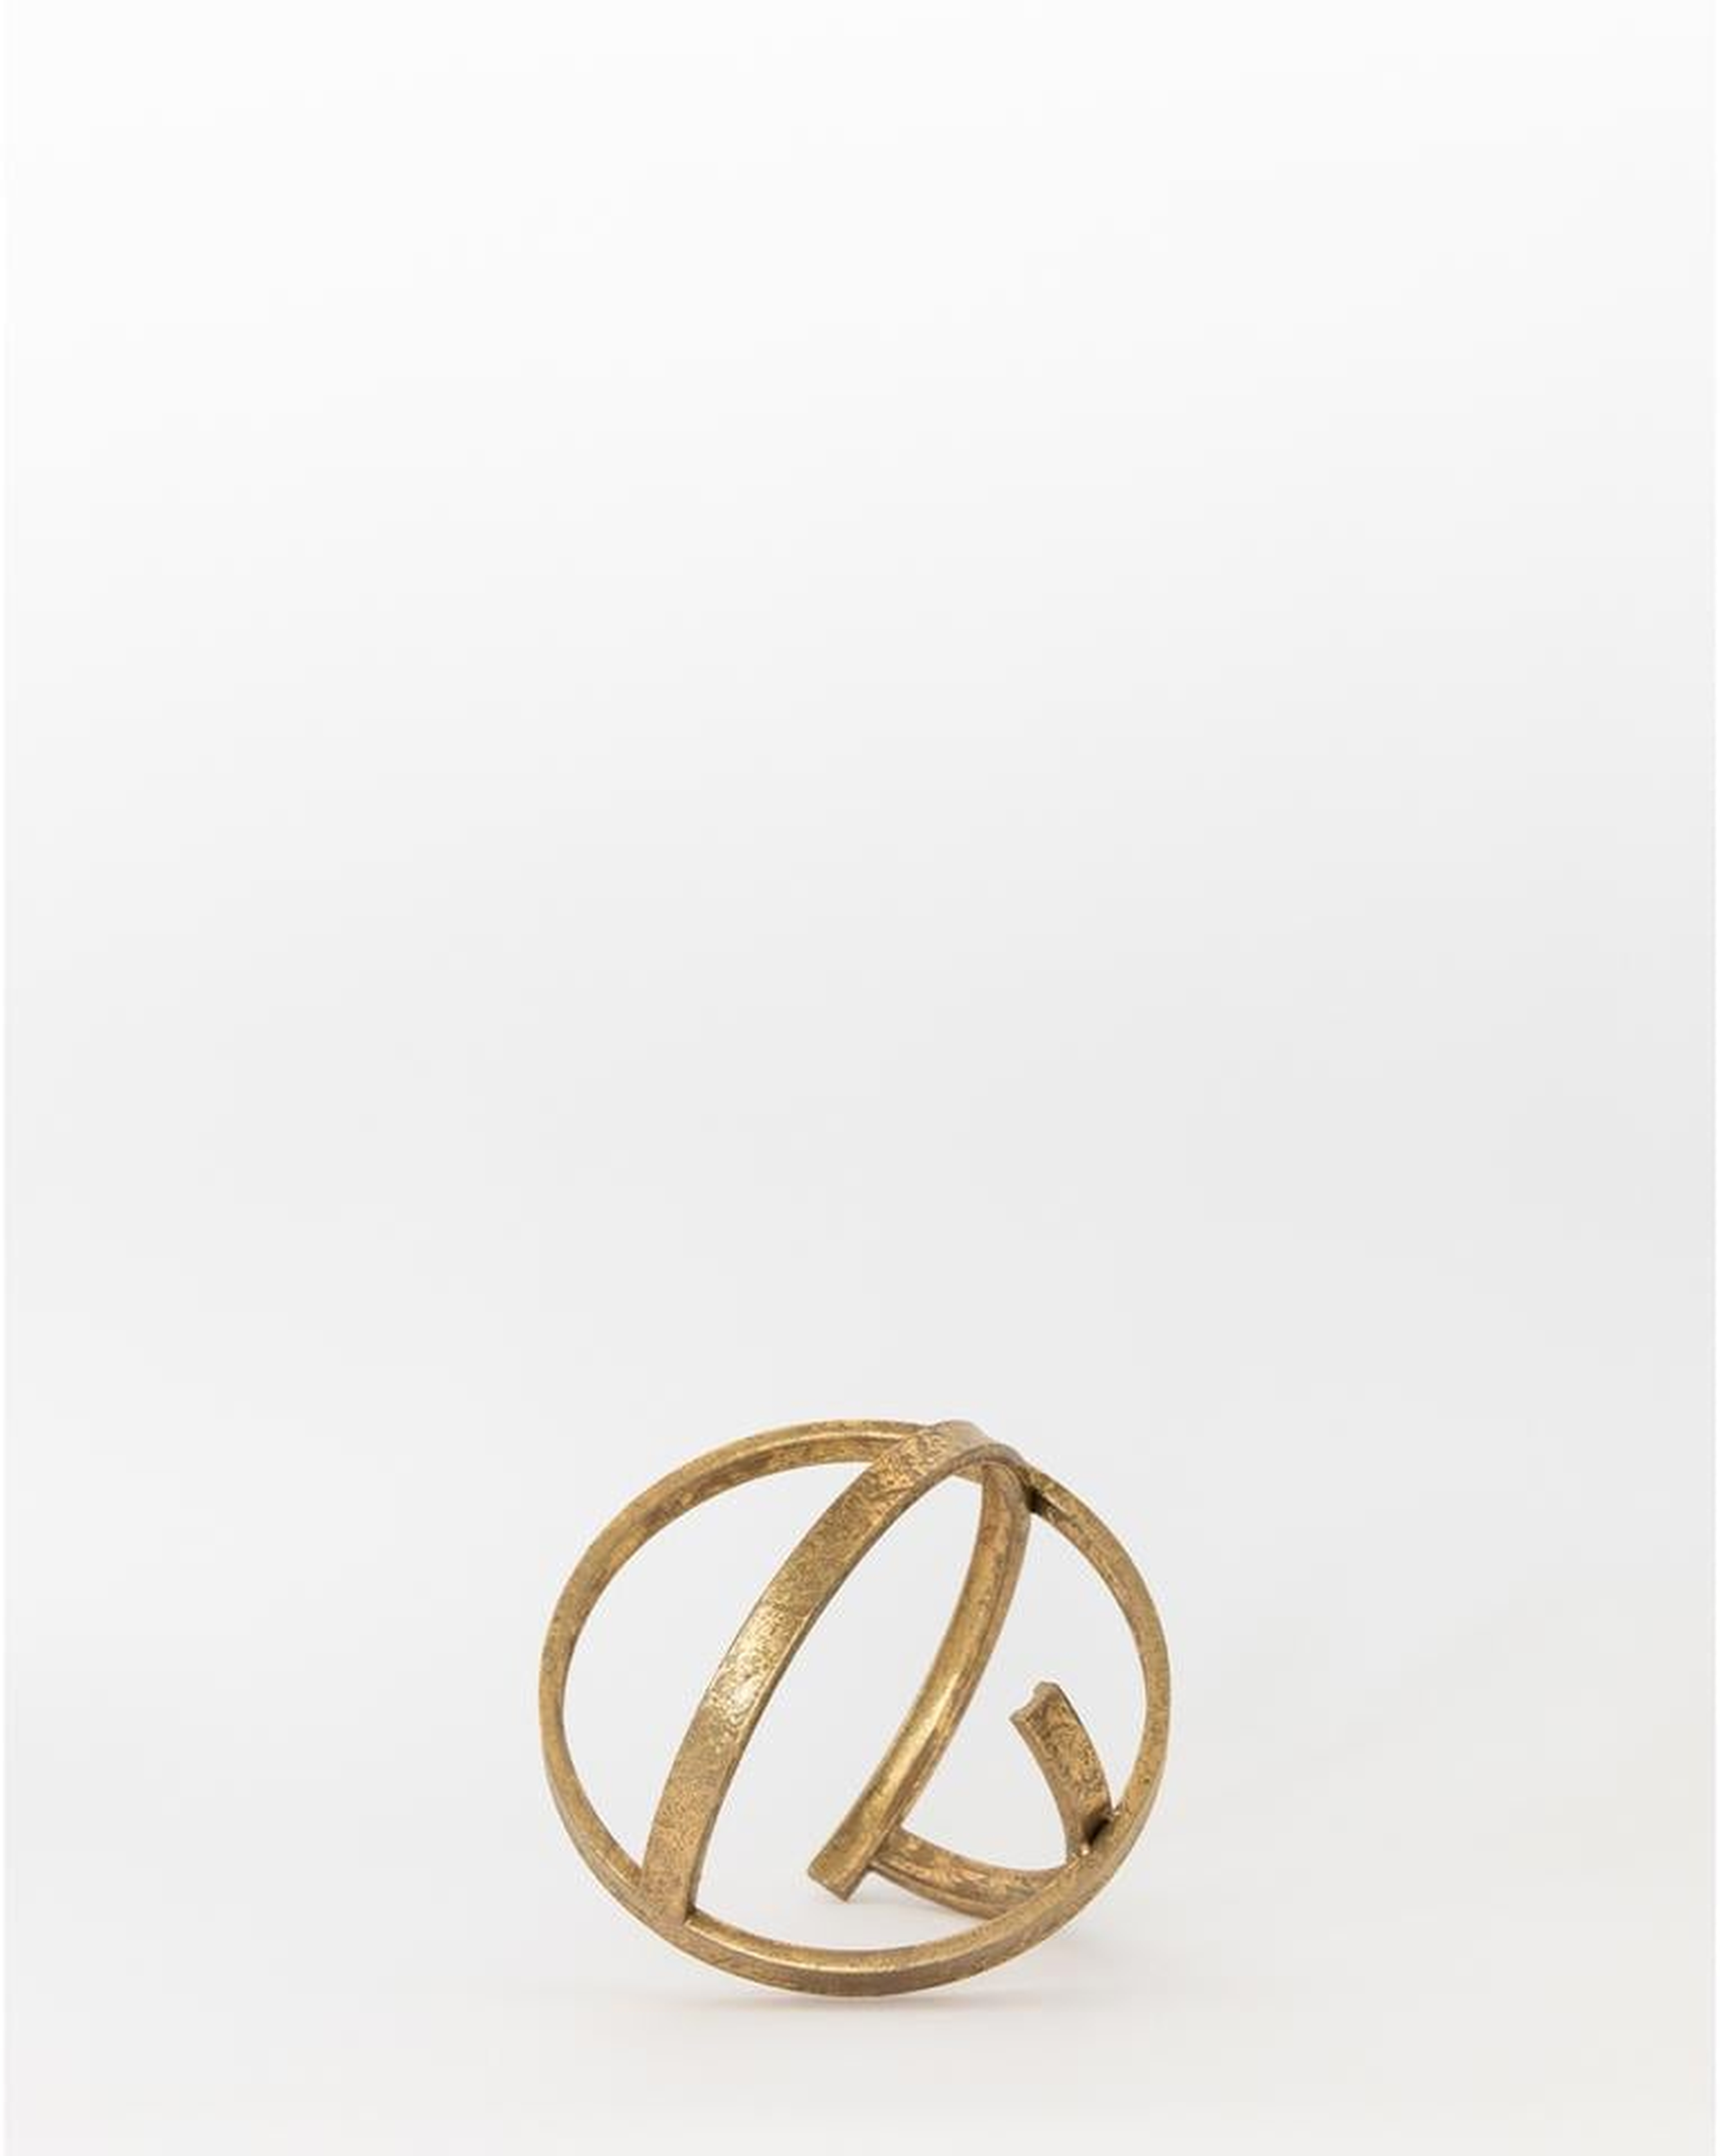 BRASS RINGS OBJECT - Large - McGee & Co.